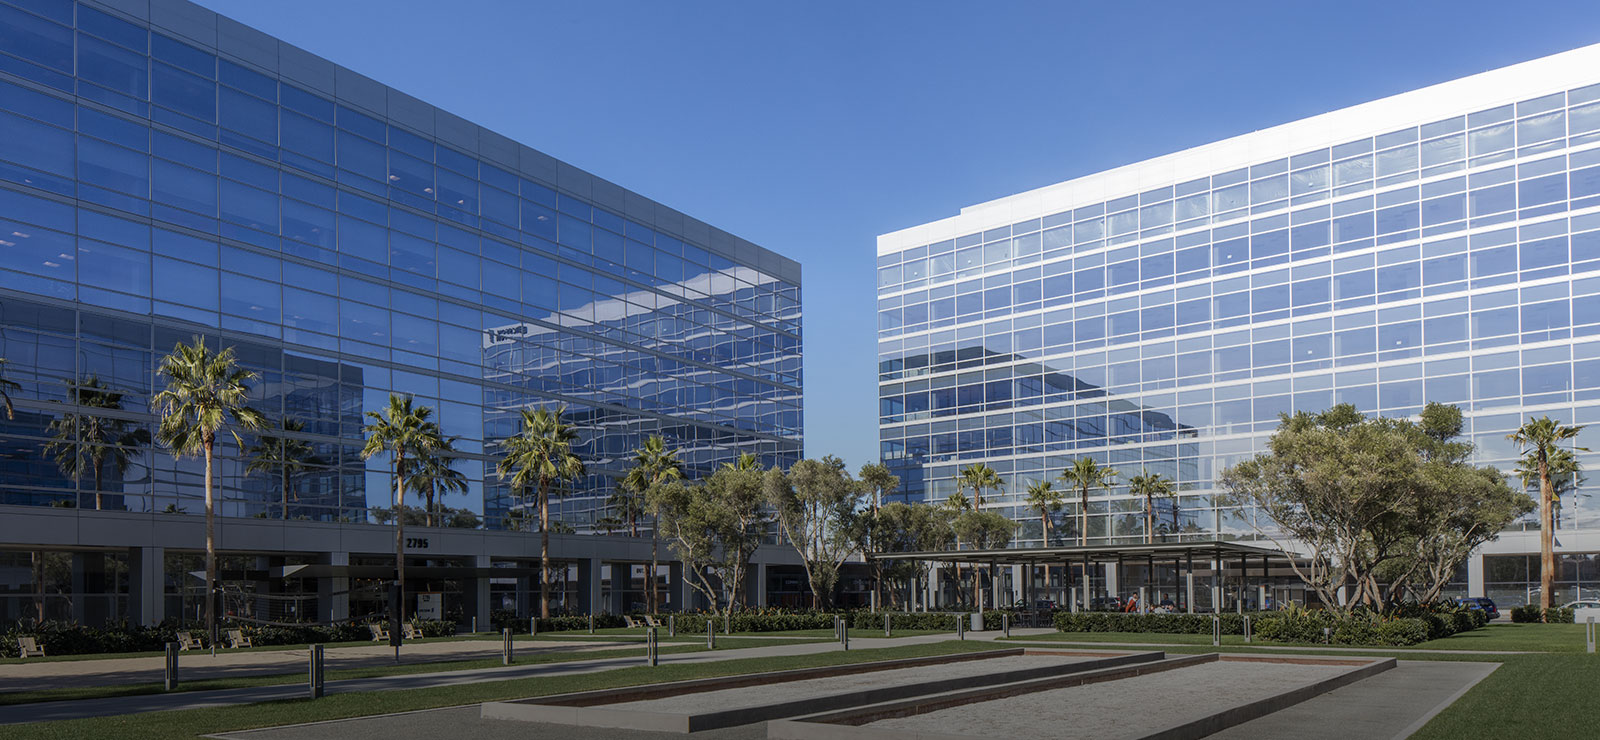 AMD Announces New State-of-the-Art Headquarters Building in Santa Clara